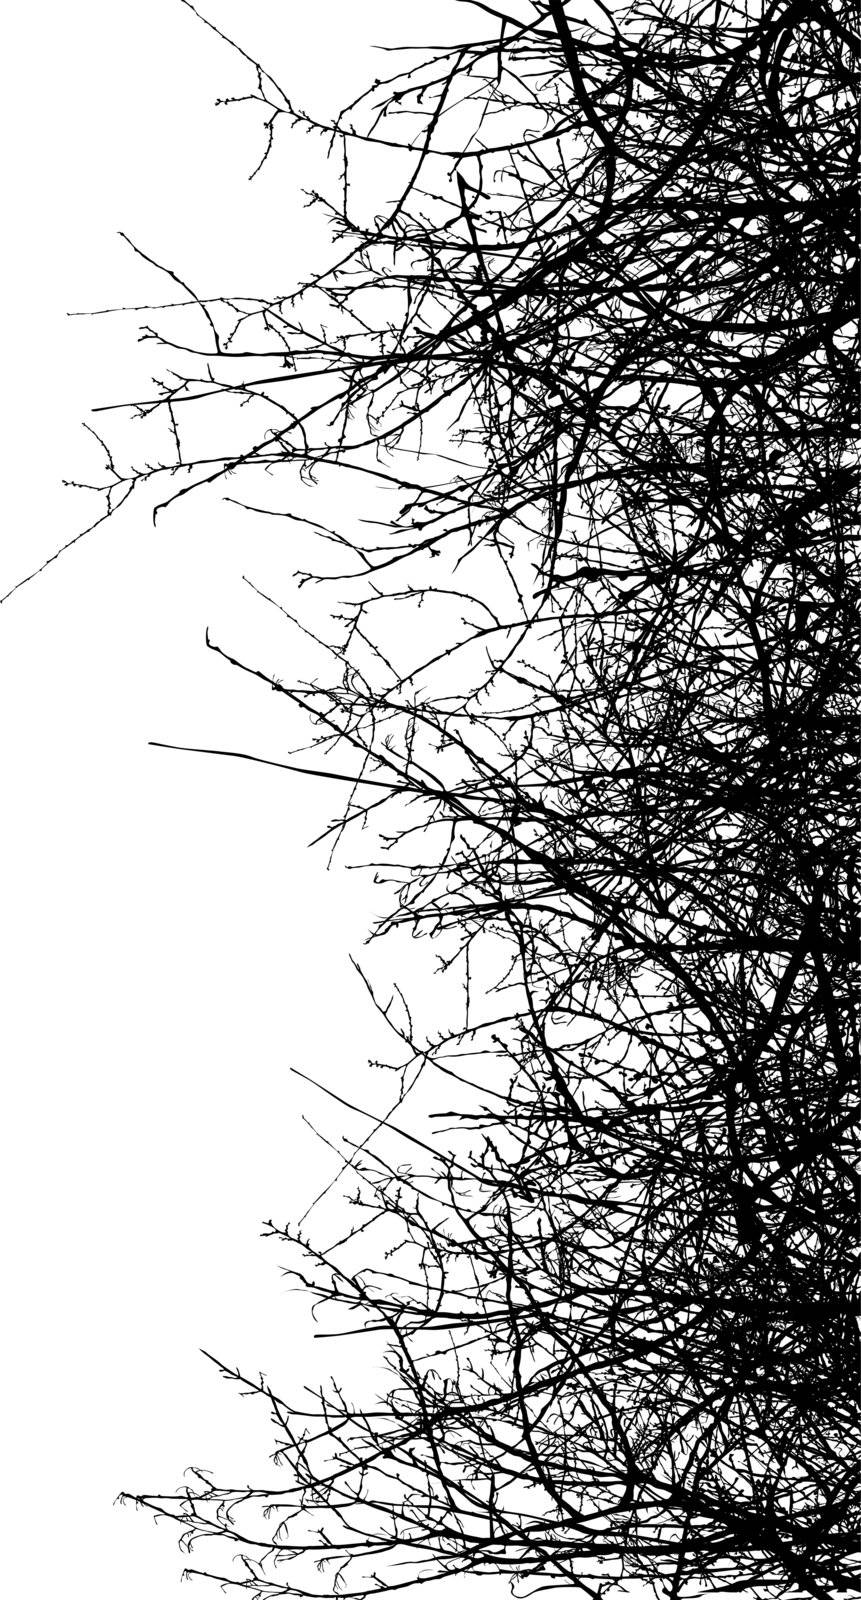 Dry bush silhouettes over white background